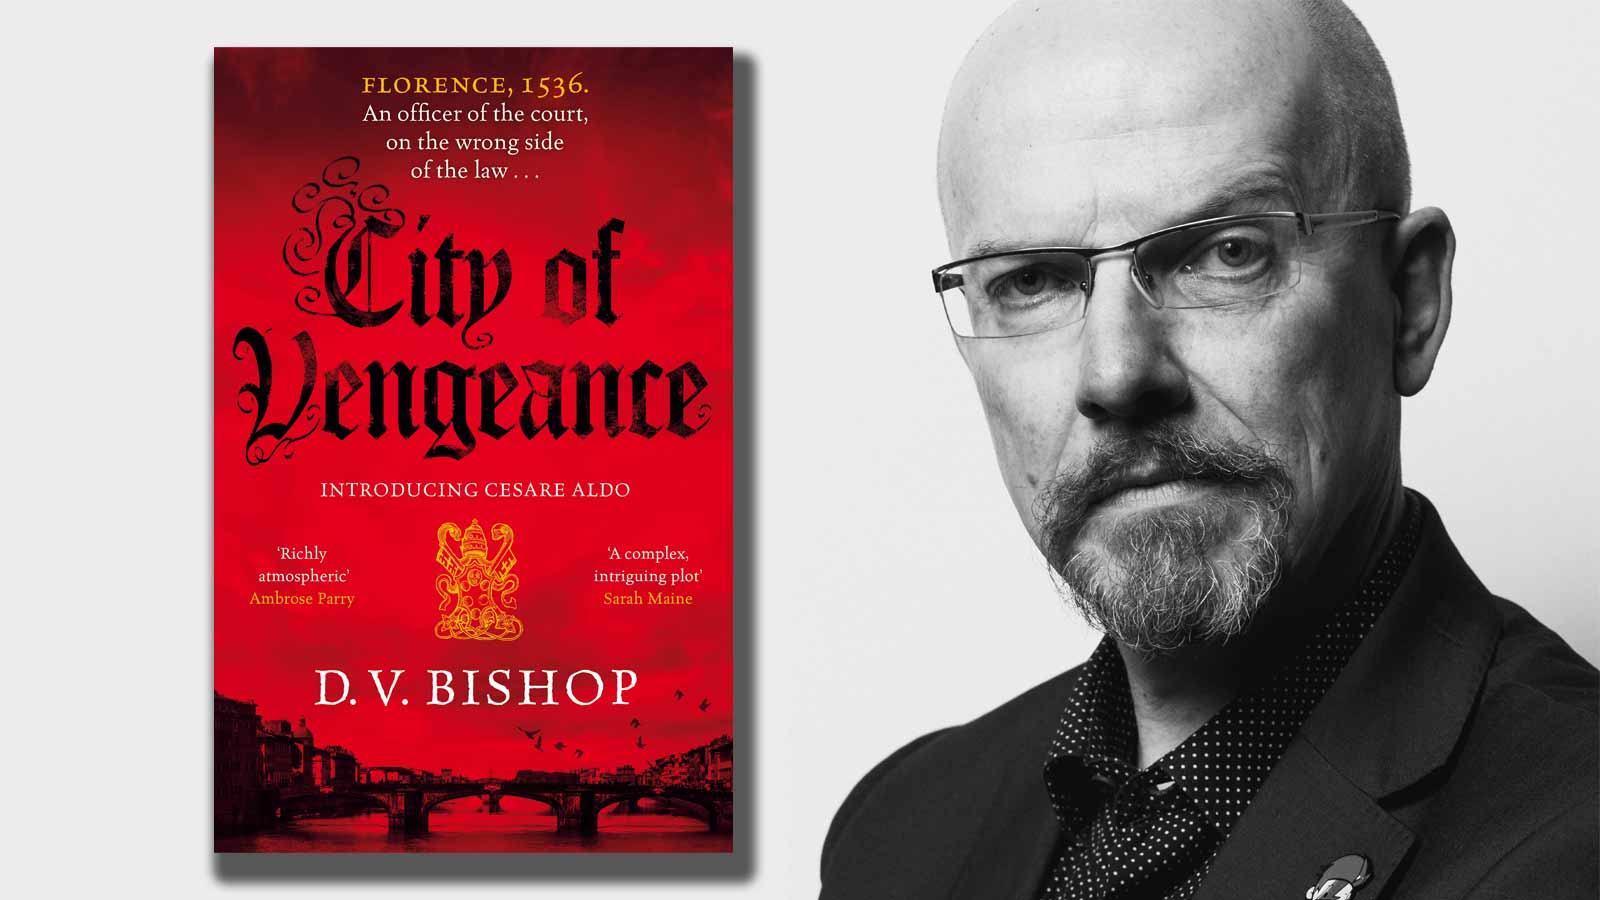 D. V. Bishop and the cover of City of Vengeance